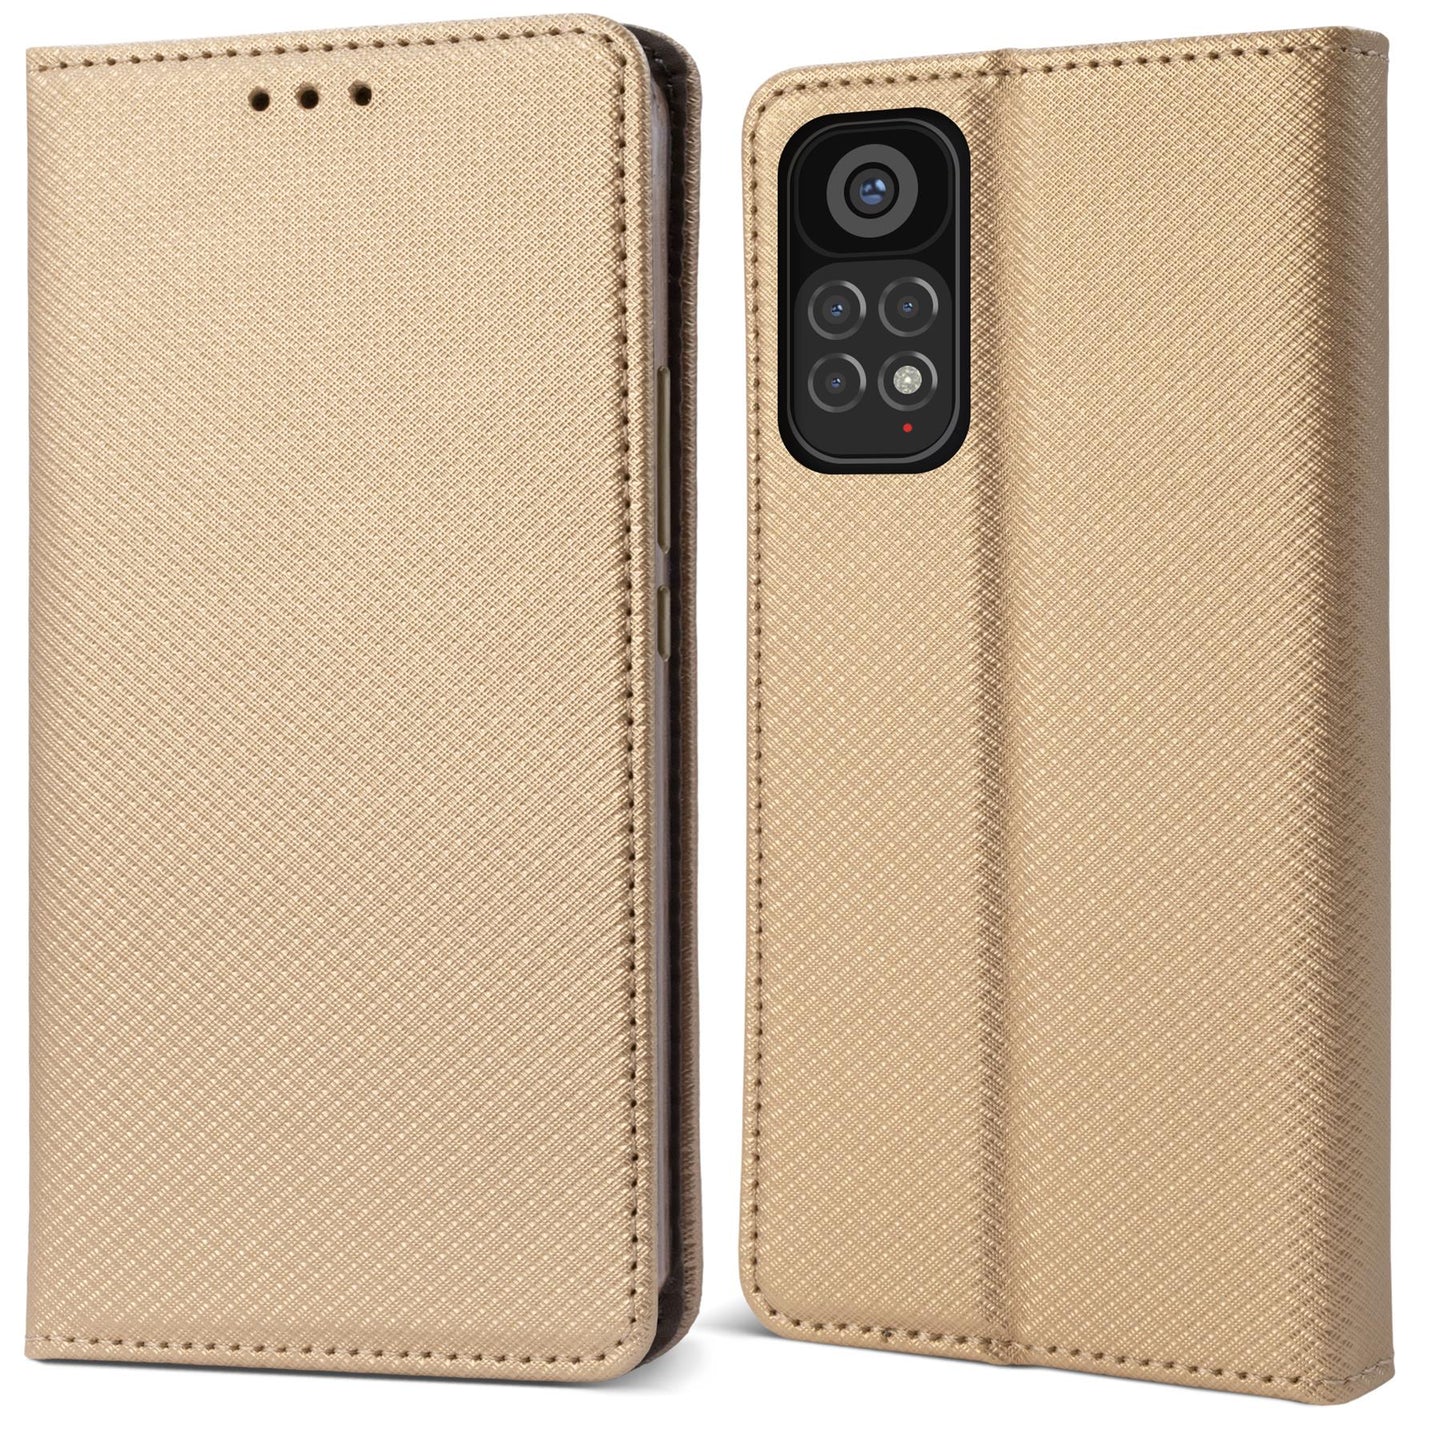 Moozy Case Flip Cover for Xiaomi Redmi Note 11 / 11S, Gold - Smart Magnetic Flip Case Flip Folio Wallet Case with Card Holder and Stand, Credit Card Slots, Kickstand Function